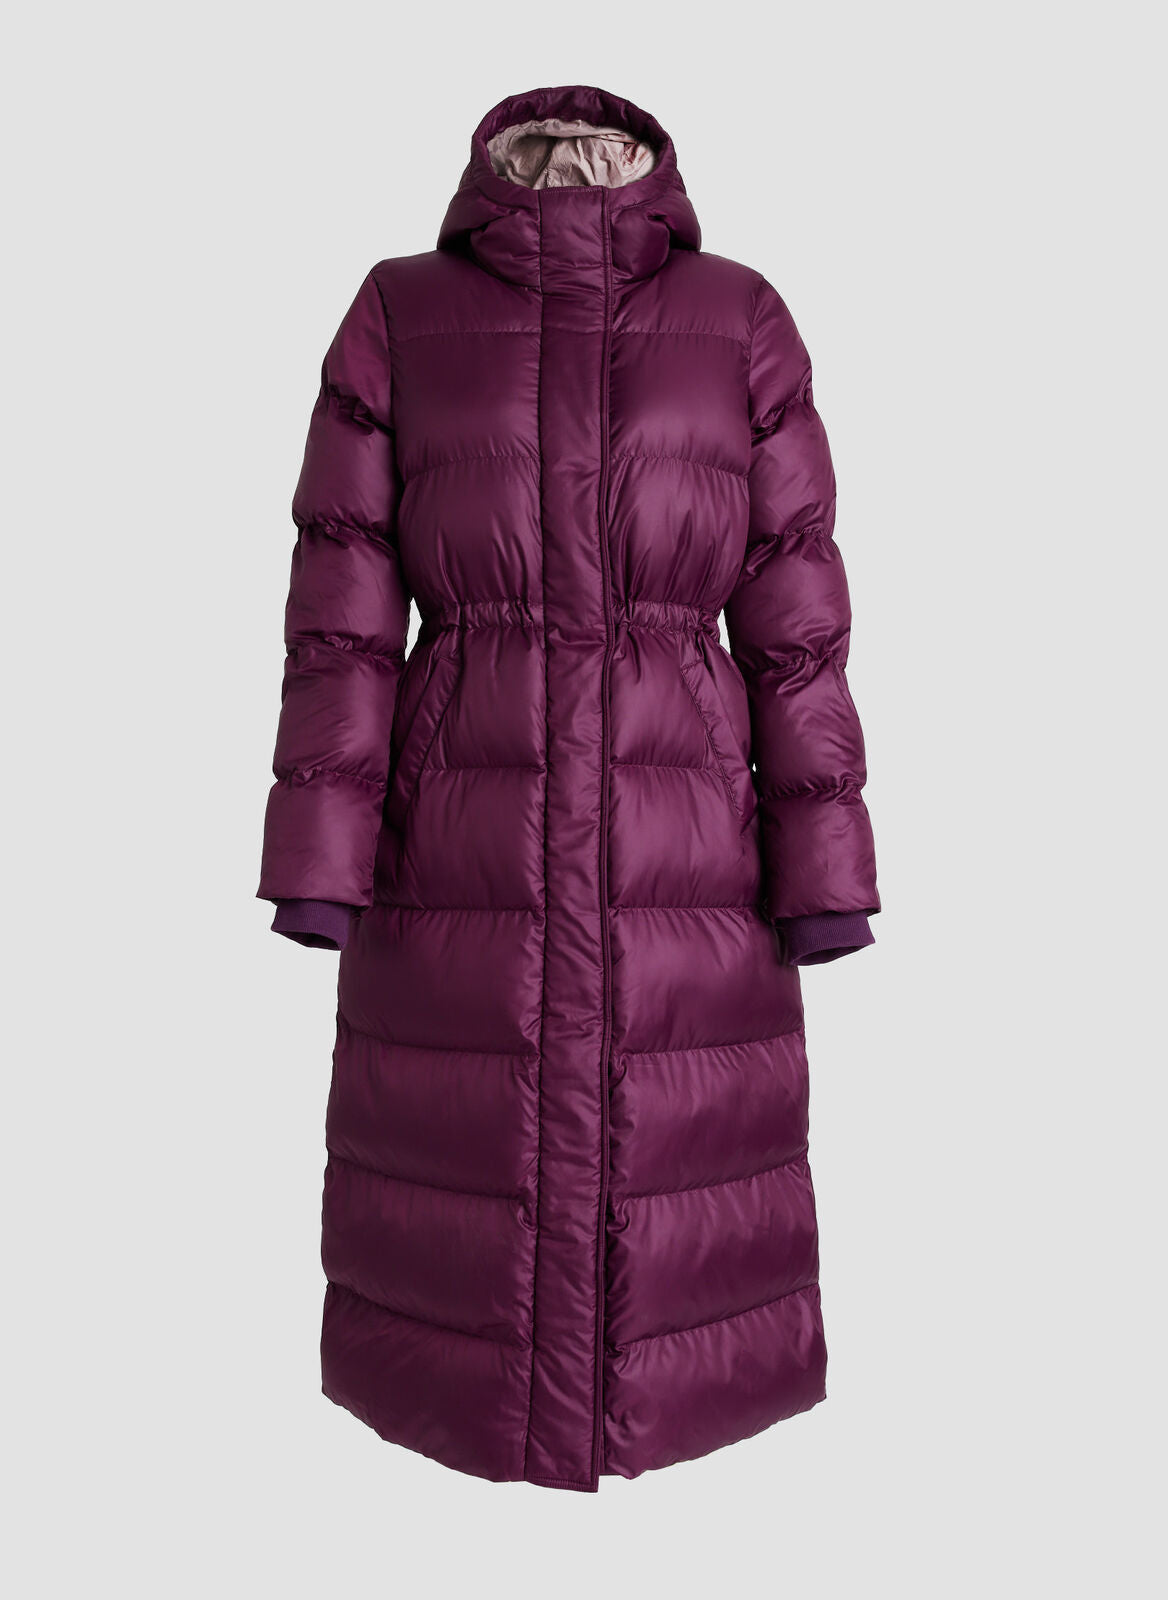 Long Winter Puffer Coat | Women's Jackets – Kit and Ace